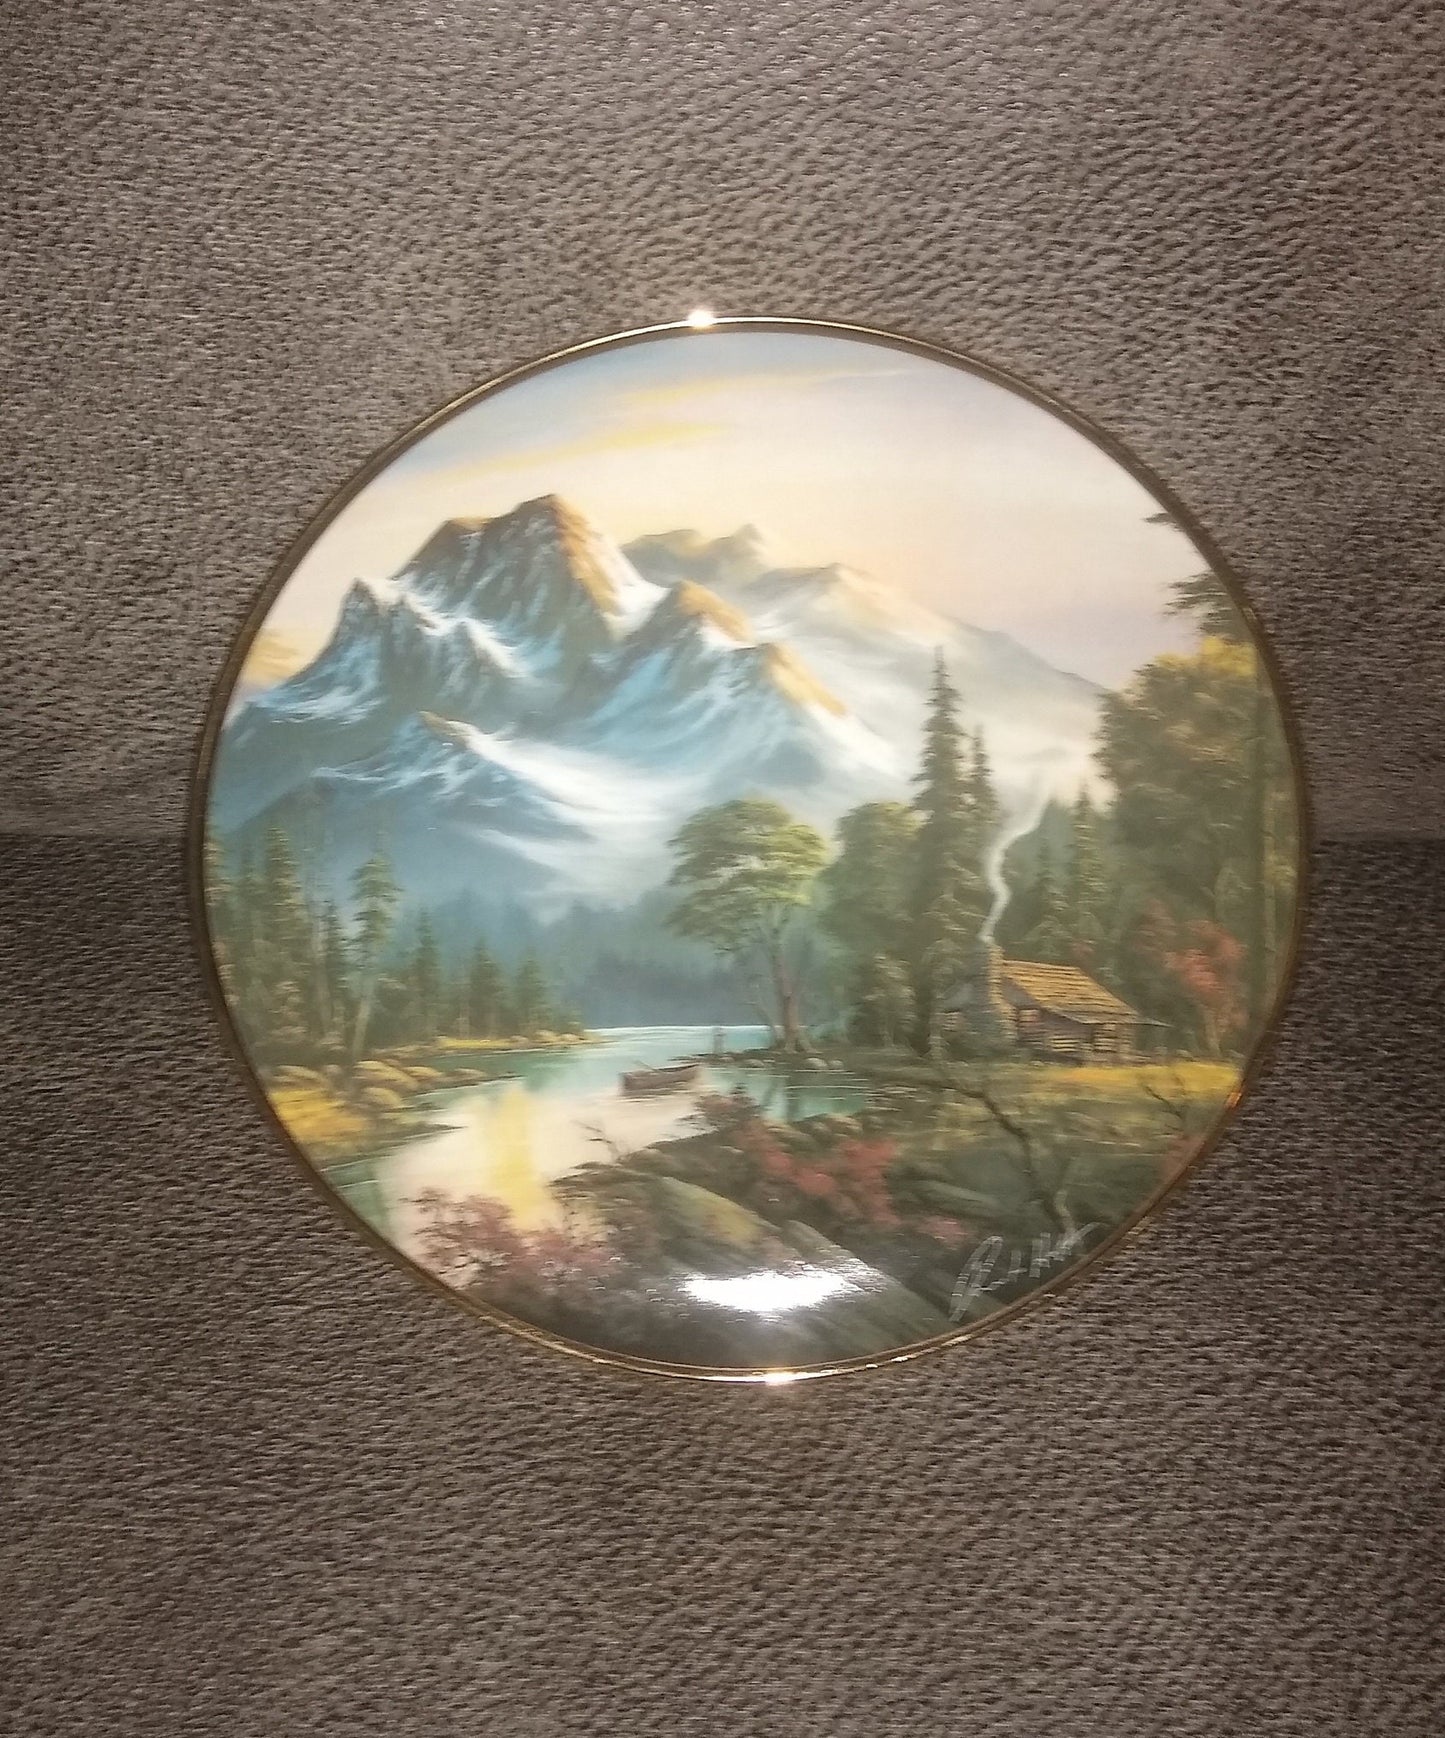 Franklin Mint Heirloom Plate. A Plate Featuring A  Mountain Retreat  With Scenic Mountains In The Background. Created By Ron Huff In 1992.  